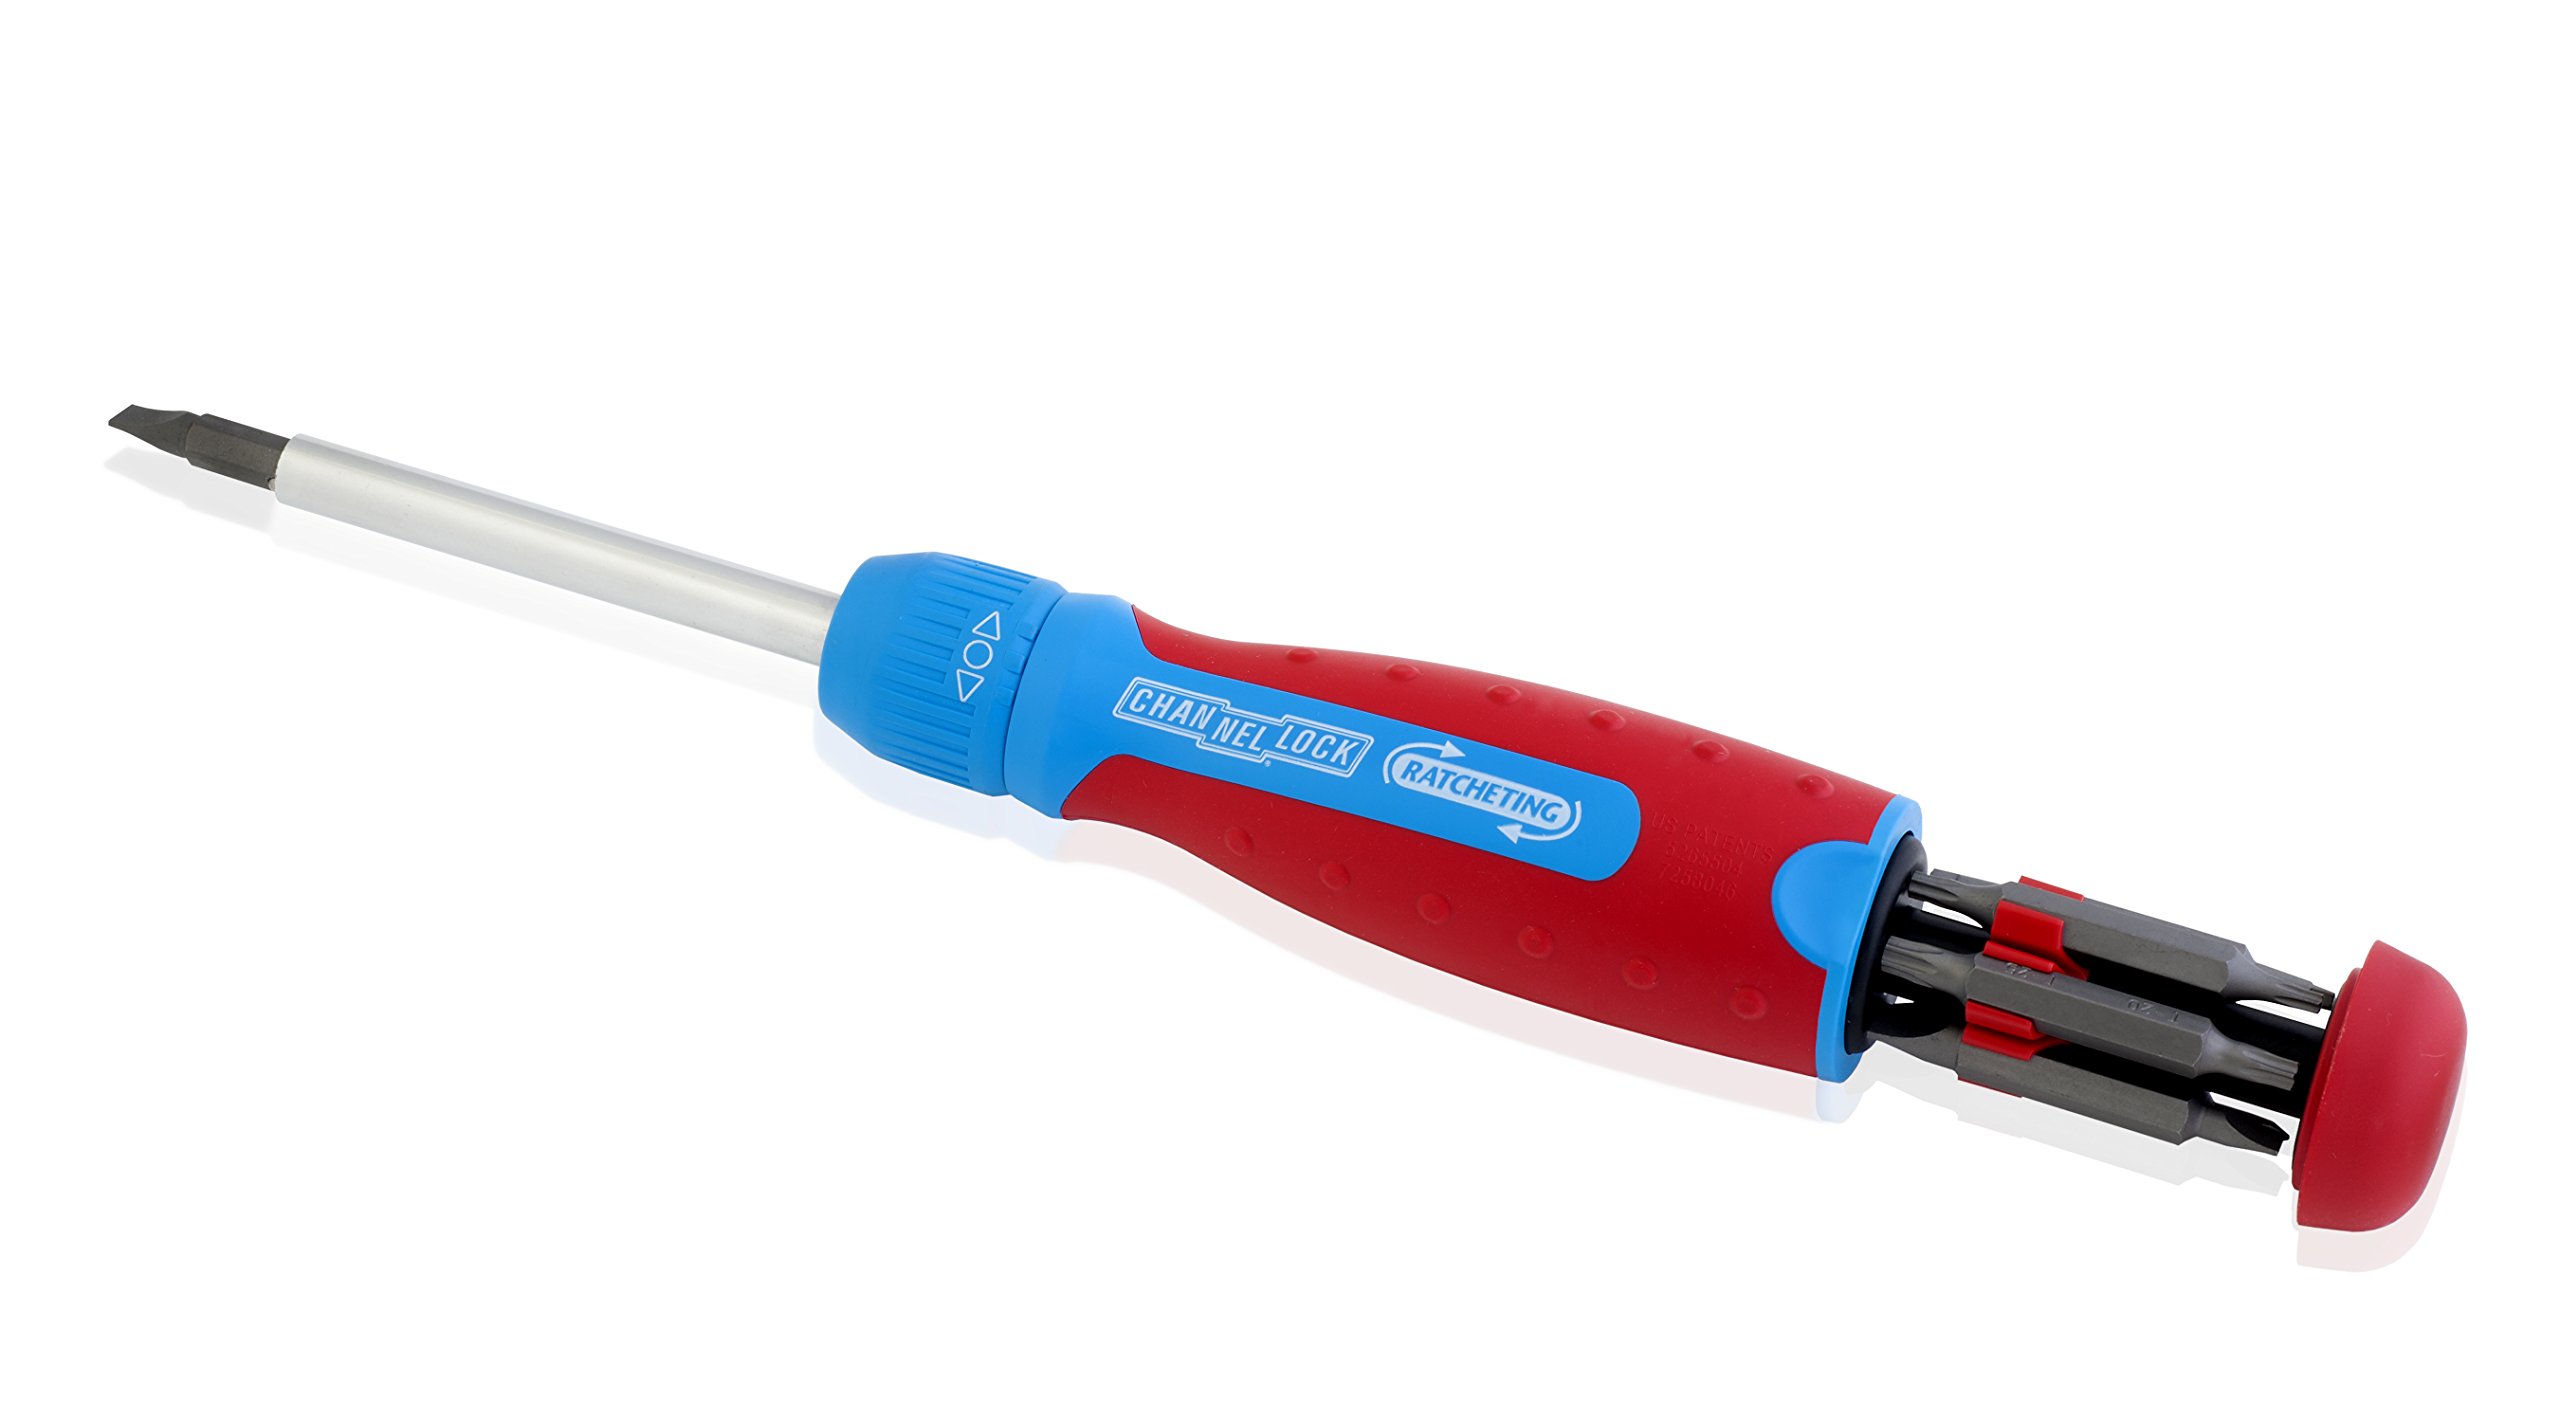 Channellock 131CB 13-in-1 Ratcheting Screwdriver | Multi-Bit Storage | 1/4-Inch Nut Driver | Quick-Load Handle with Cushion Grip | 28-Tooth Ratchet Mechanism Provides up to 225 lbs. of Torque , Red